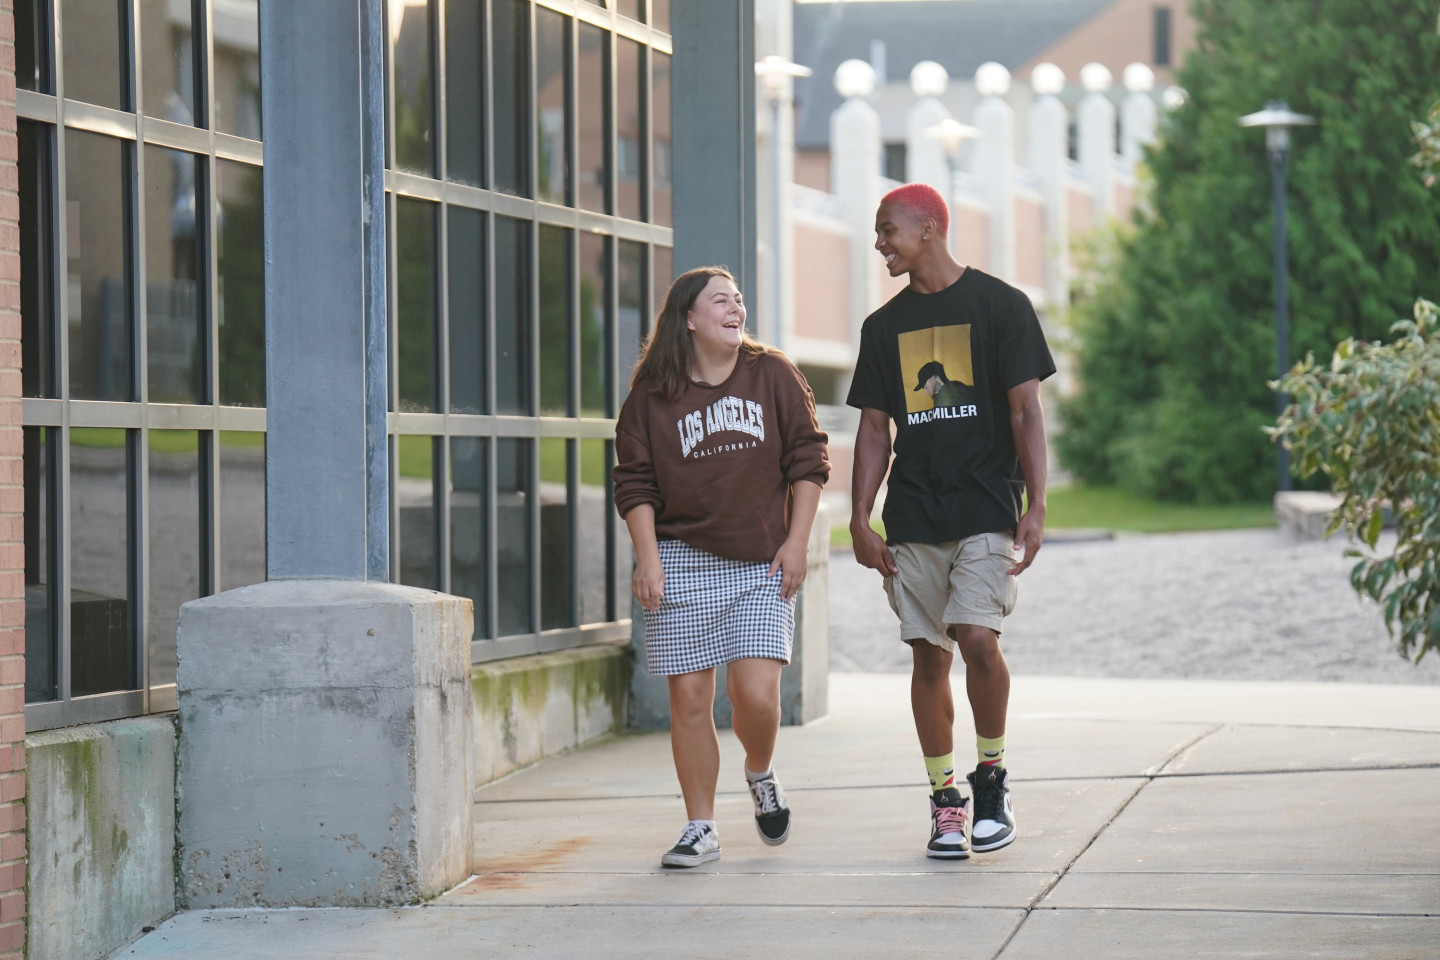 Students walk together on campus.